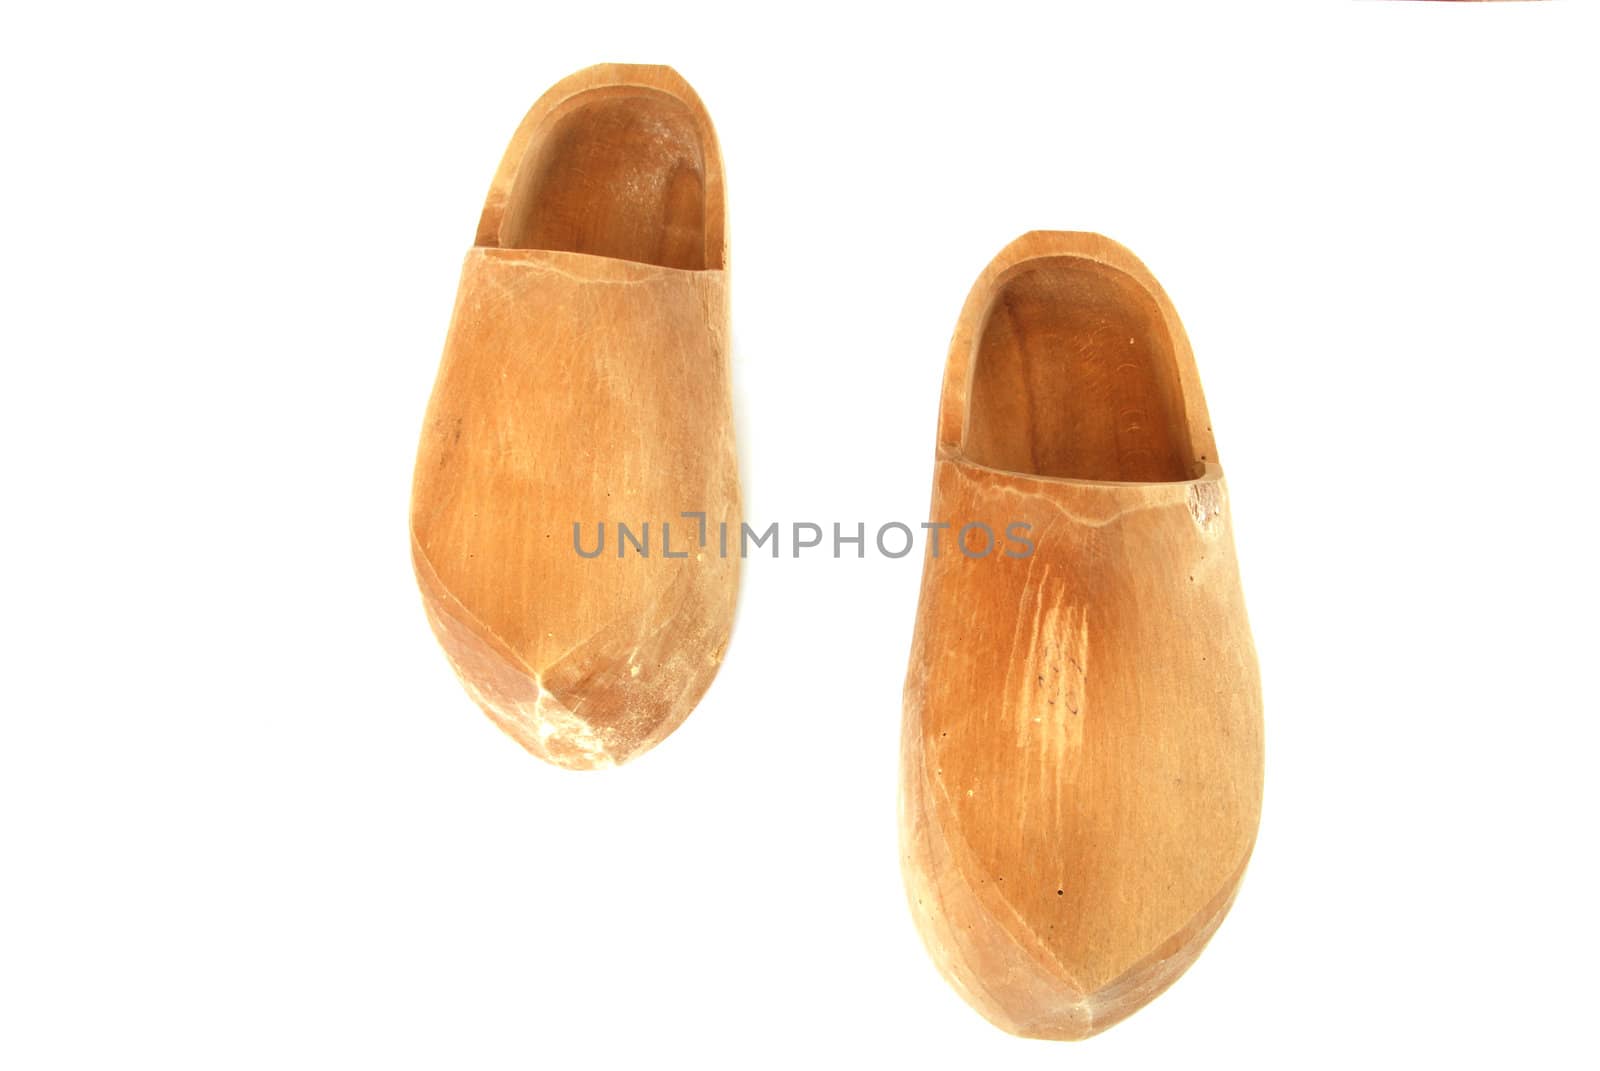 A pair of ancient wooden shoes on white 